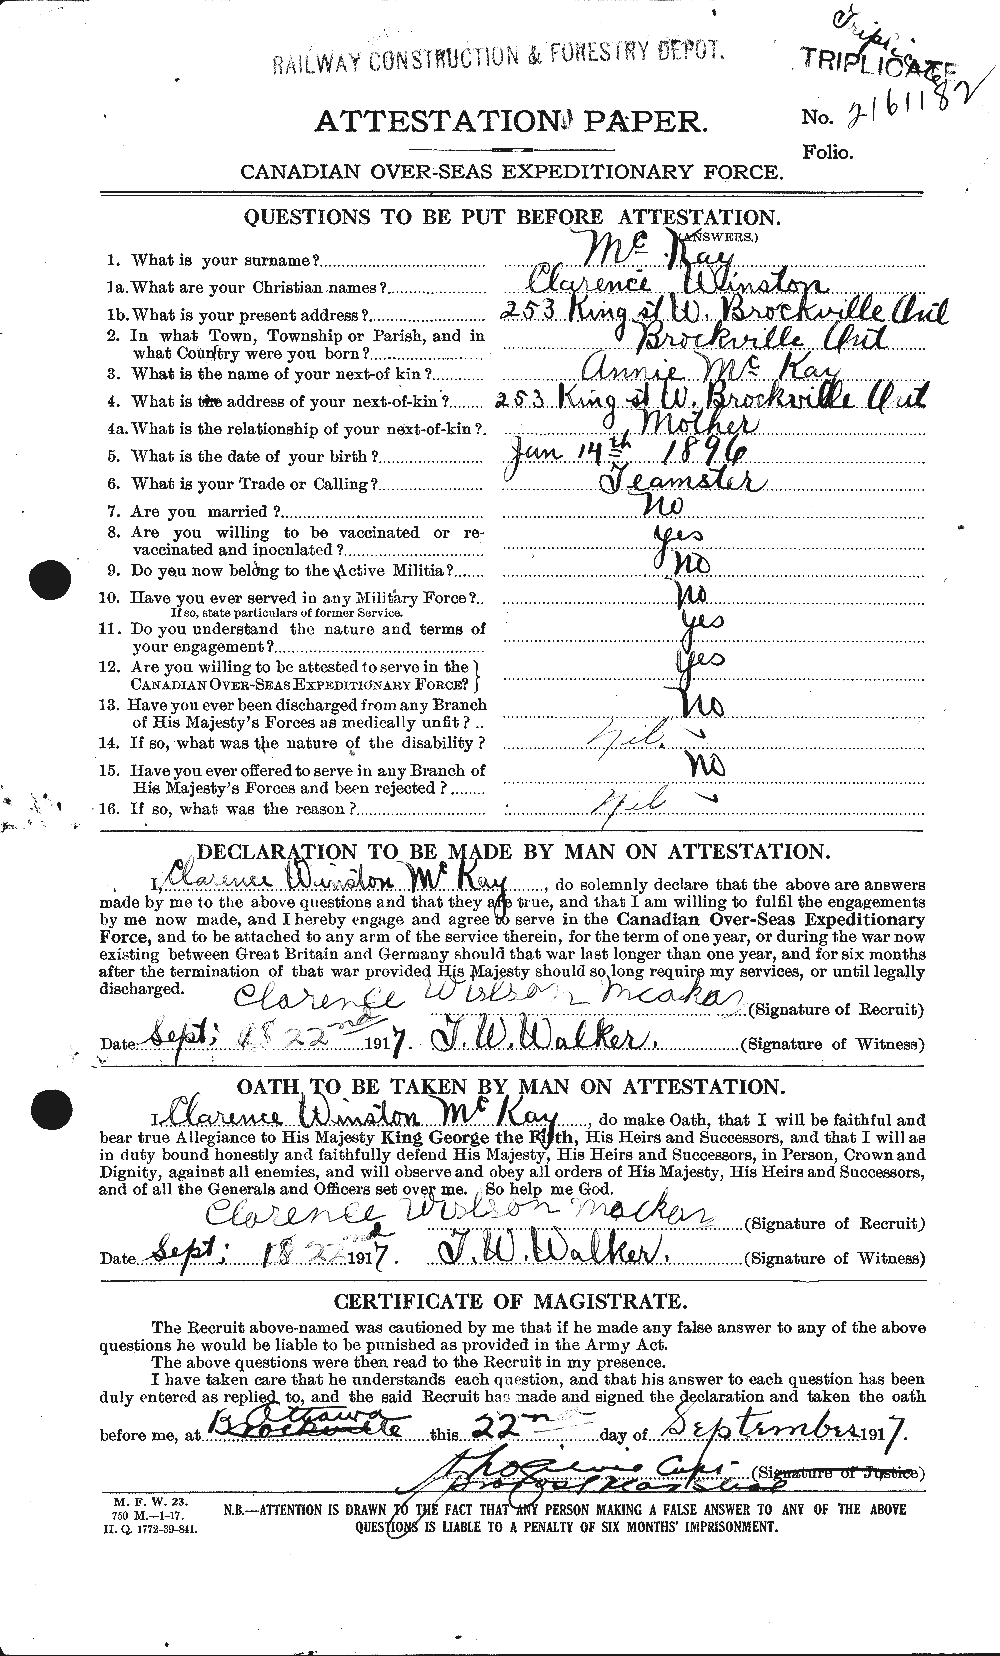 Personnel Records of the First World War - CEF 531093a